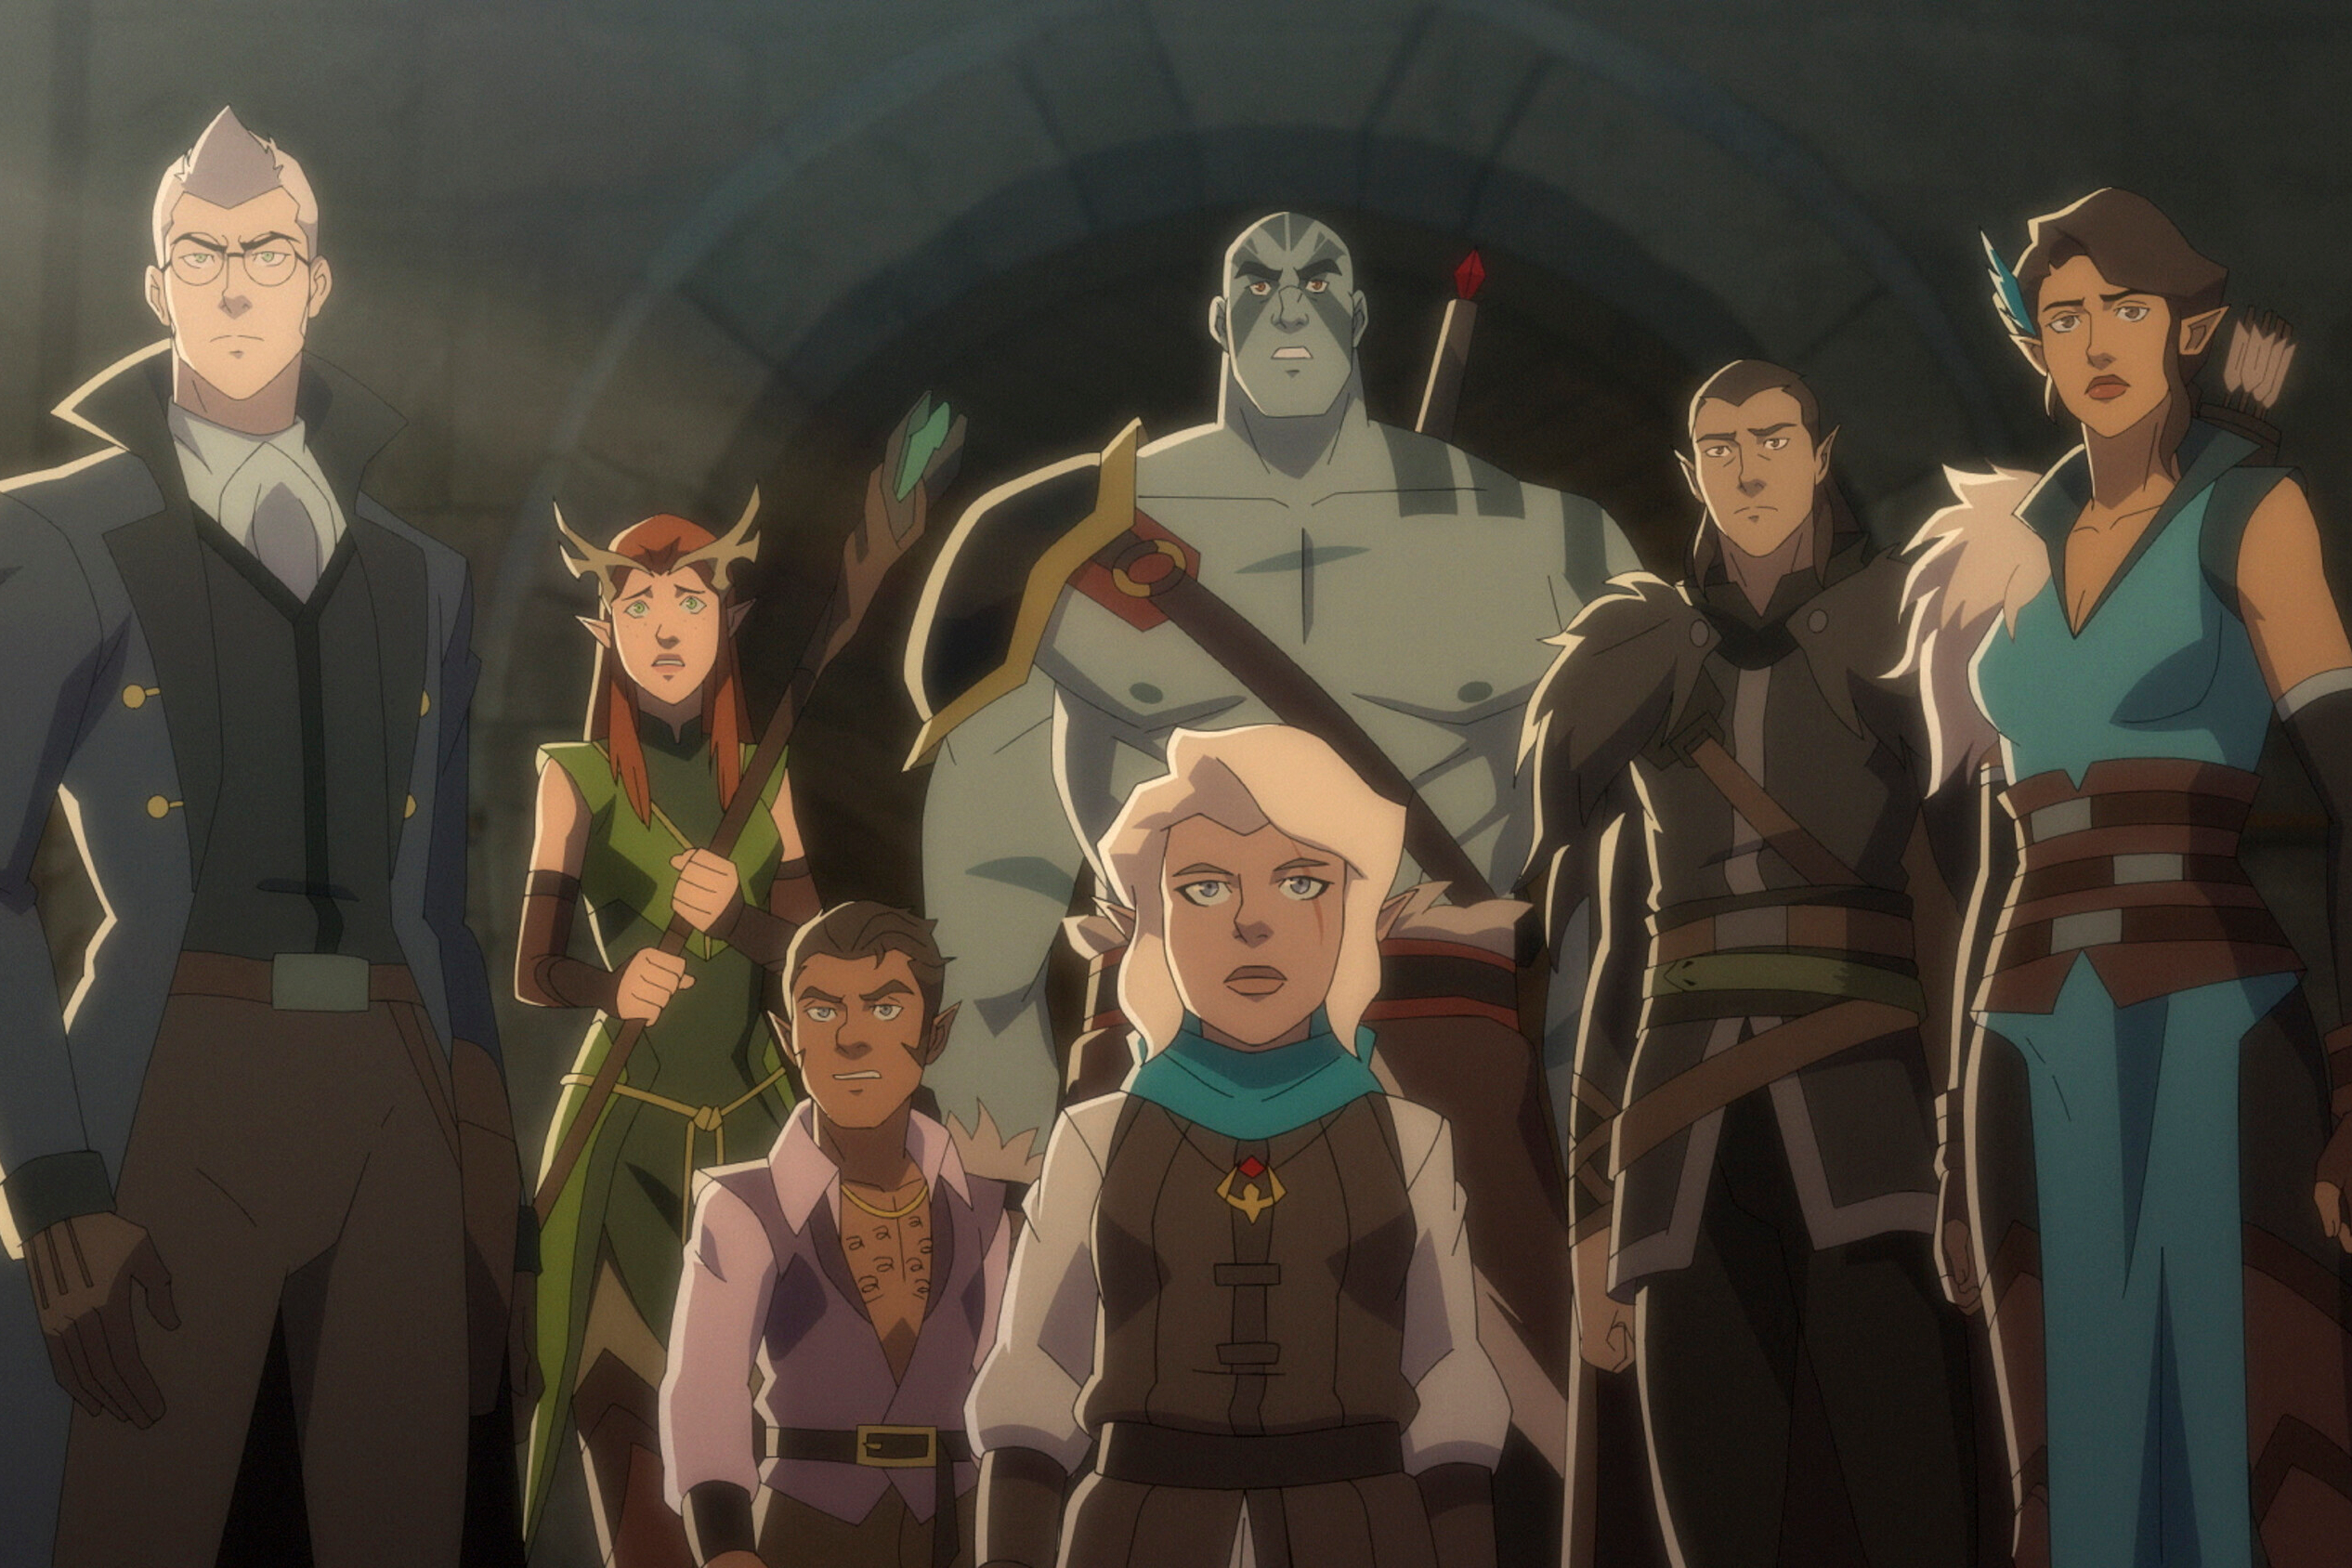 Vox Machina is together in front of an arch in The Legend of Vox Machina Season 2.